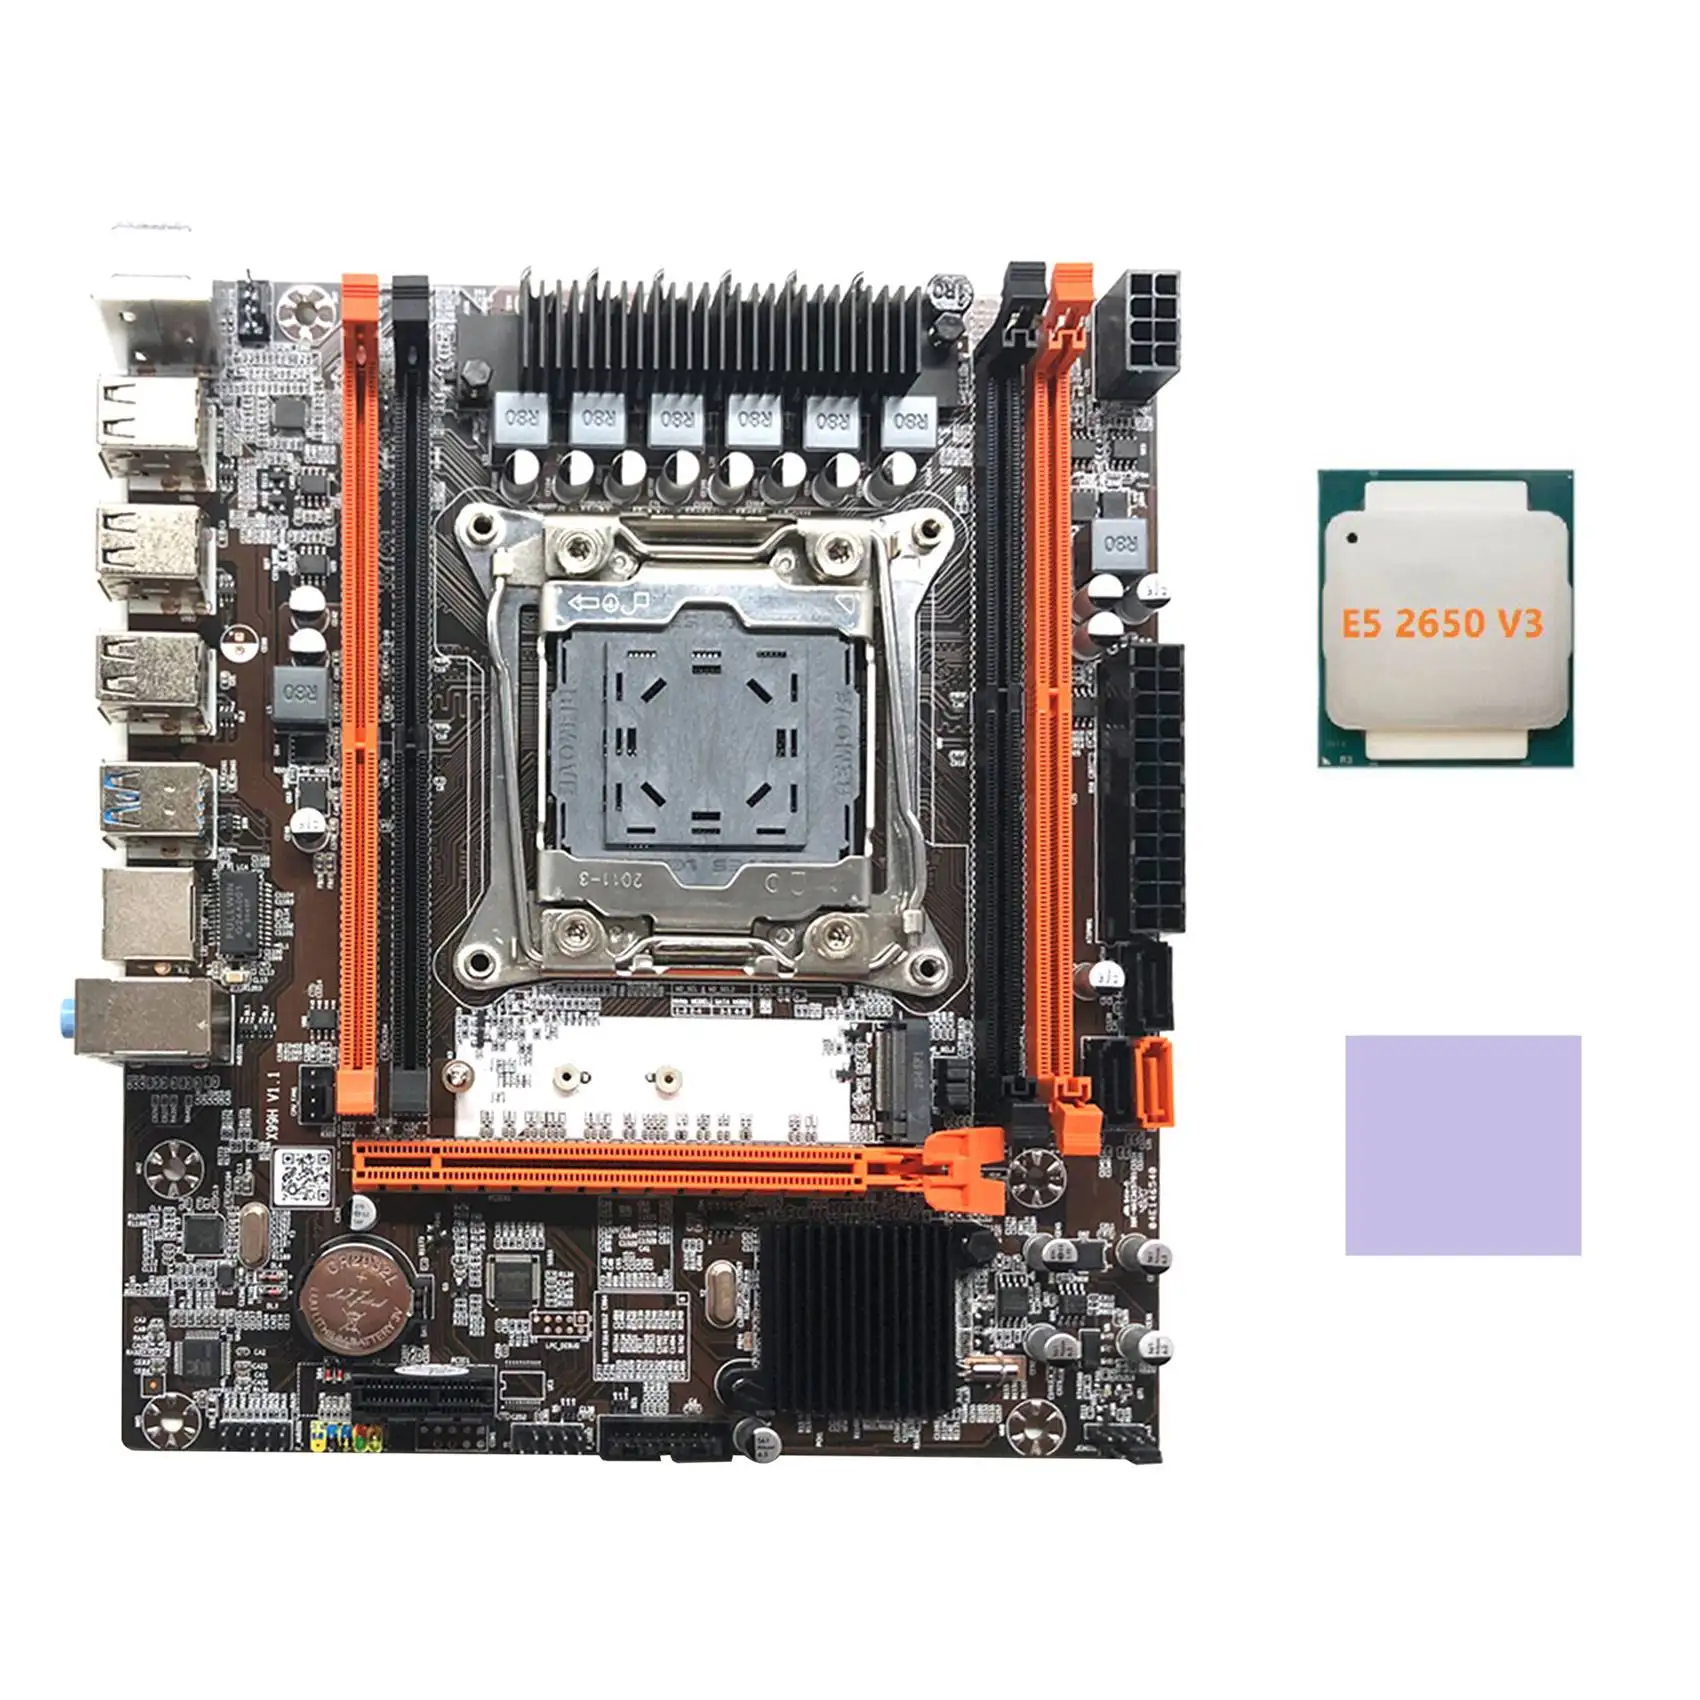 

X99H Motherboard LGA2011-3 Computer Motherboard Support Xeon E5 2678 2666 V3 Series CPU with E5 2650 V3 CPU+Thermal Pad